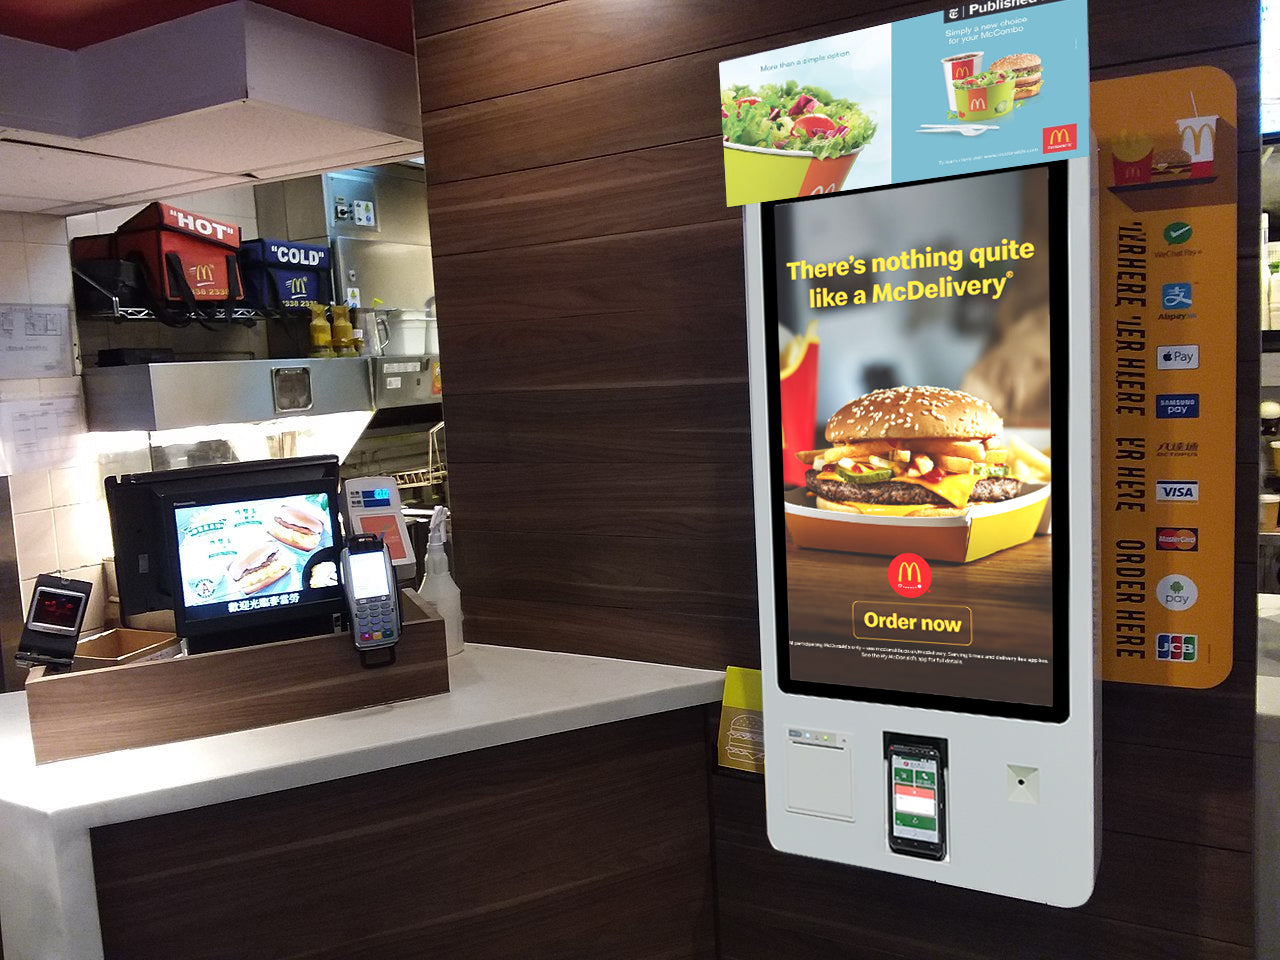 How has digital signage provided solutions in the last five years, especially during COVID-19?